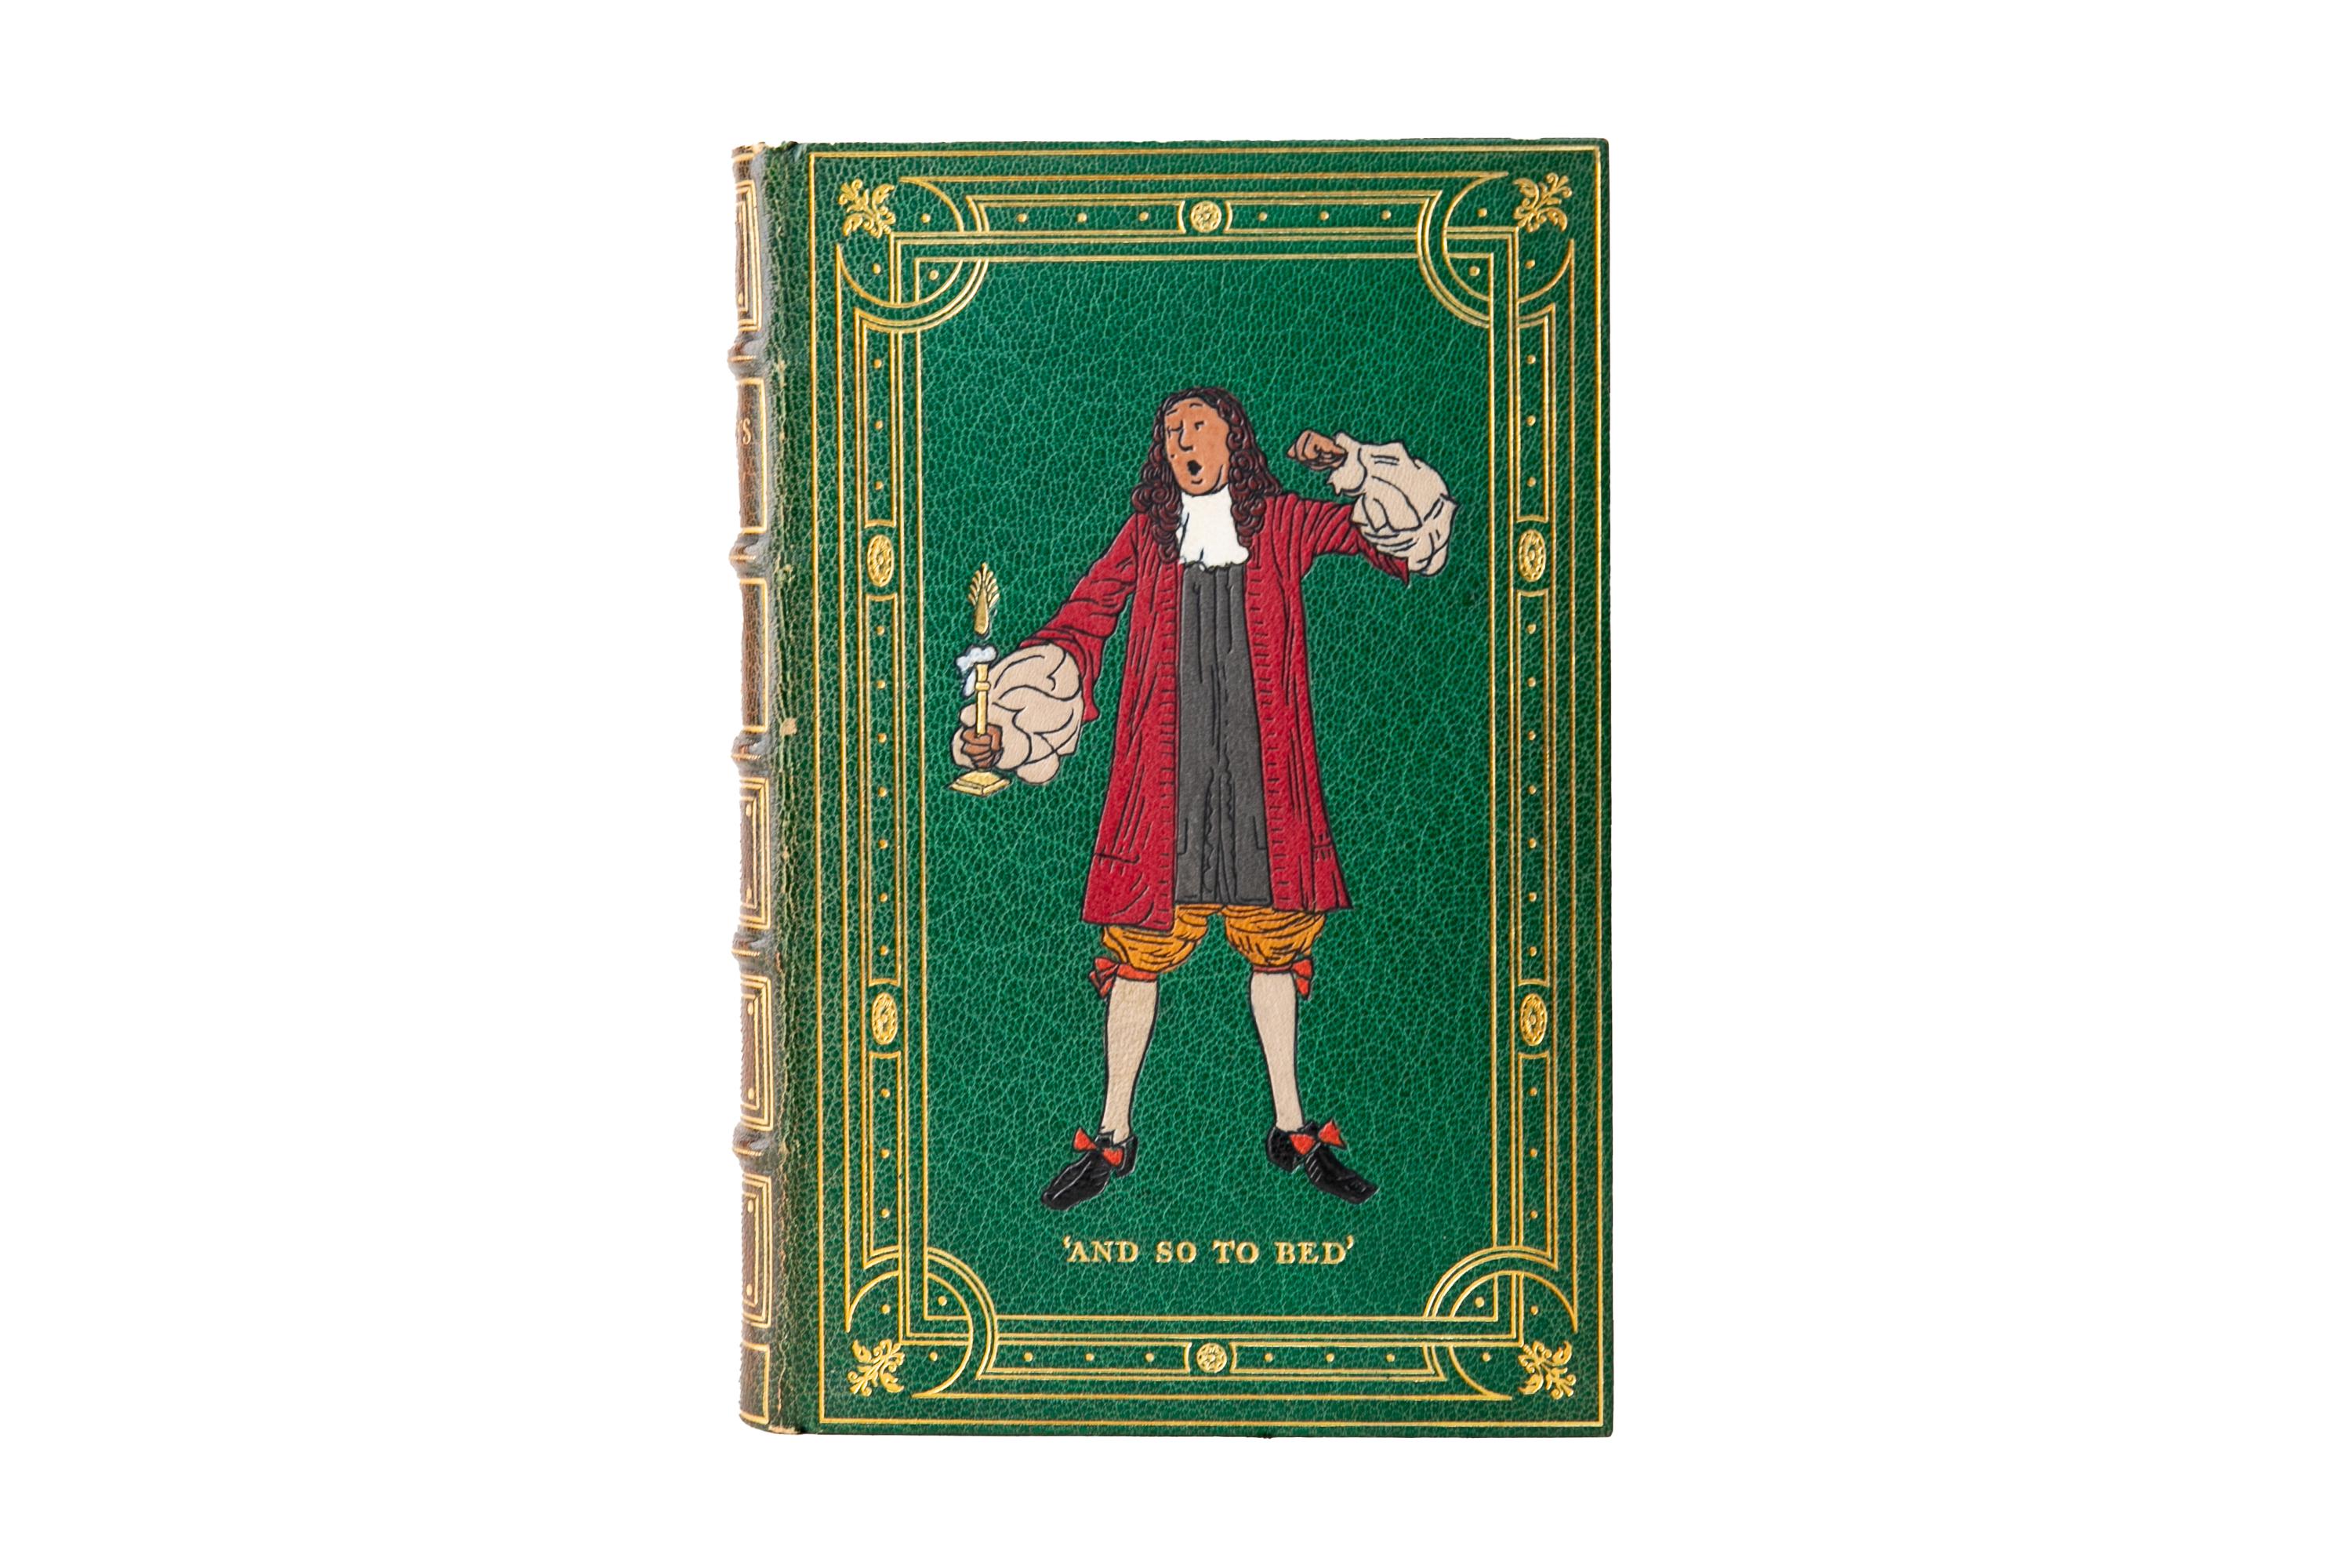 1 Volume. Samuel Pepys, Diary 1660-1669. Bound by Riviere & Son in full green morocco with gilt-tooled detailing on the covers and raised band spine. The cover also displays a multi-color inlay figure. All edges gilt with gilt-tooled dentelles and